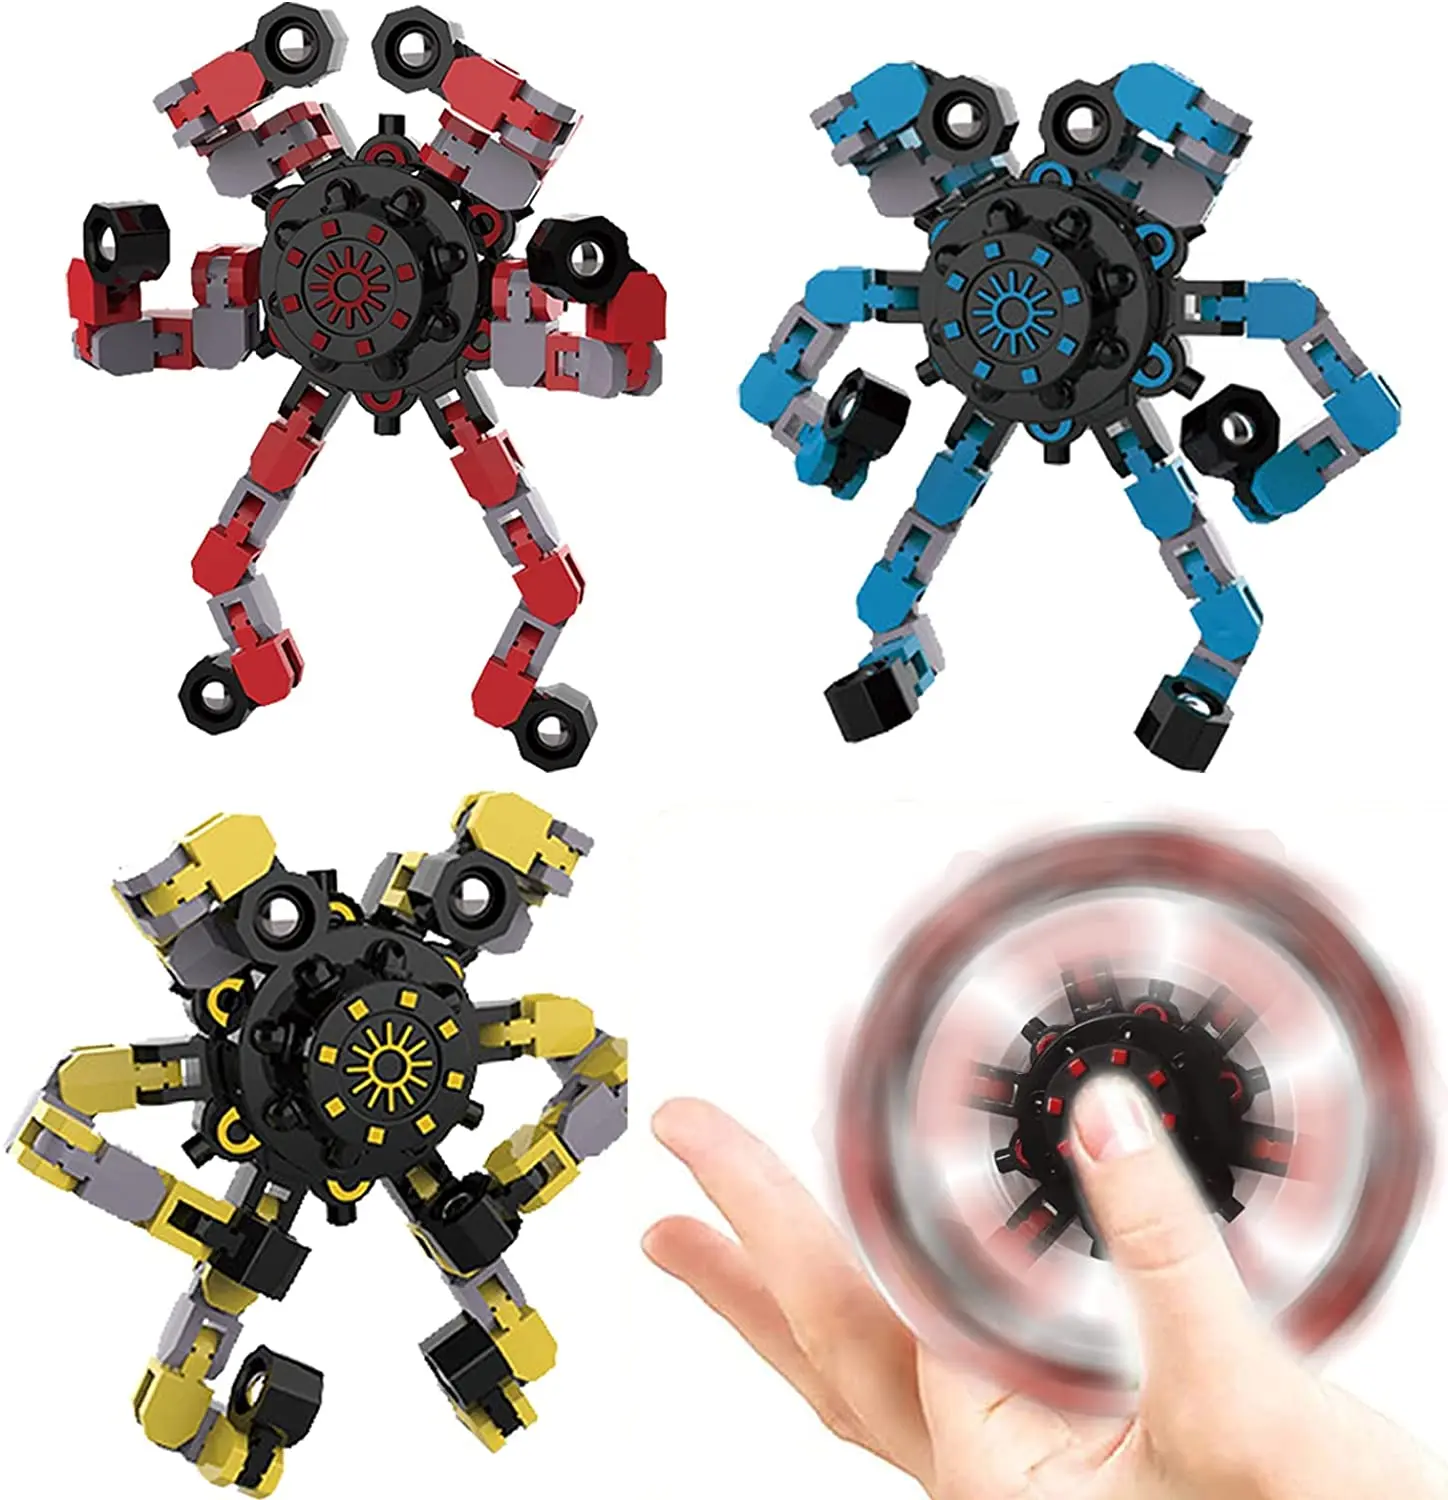 Transformable Fingertip Spinner Toys Kids Adults DIY Deformable Robot Fingertip Toys Deformable Creative Mechanical Chain Toy enlarge